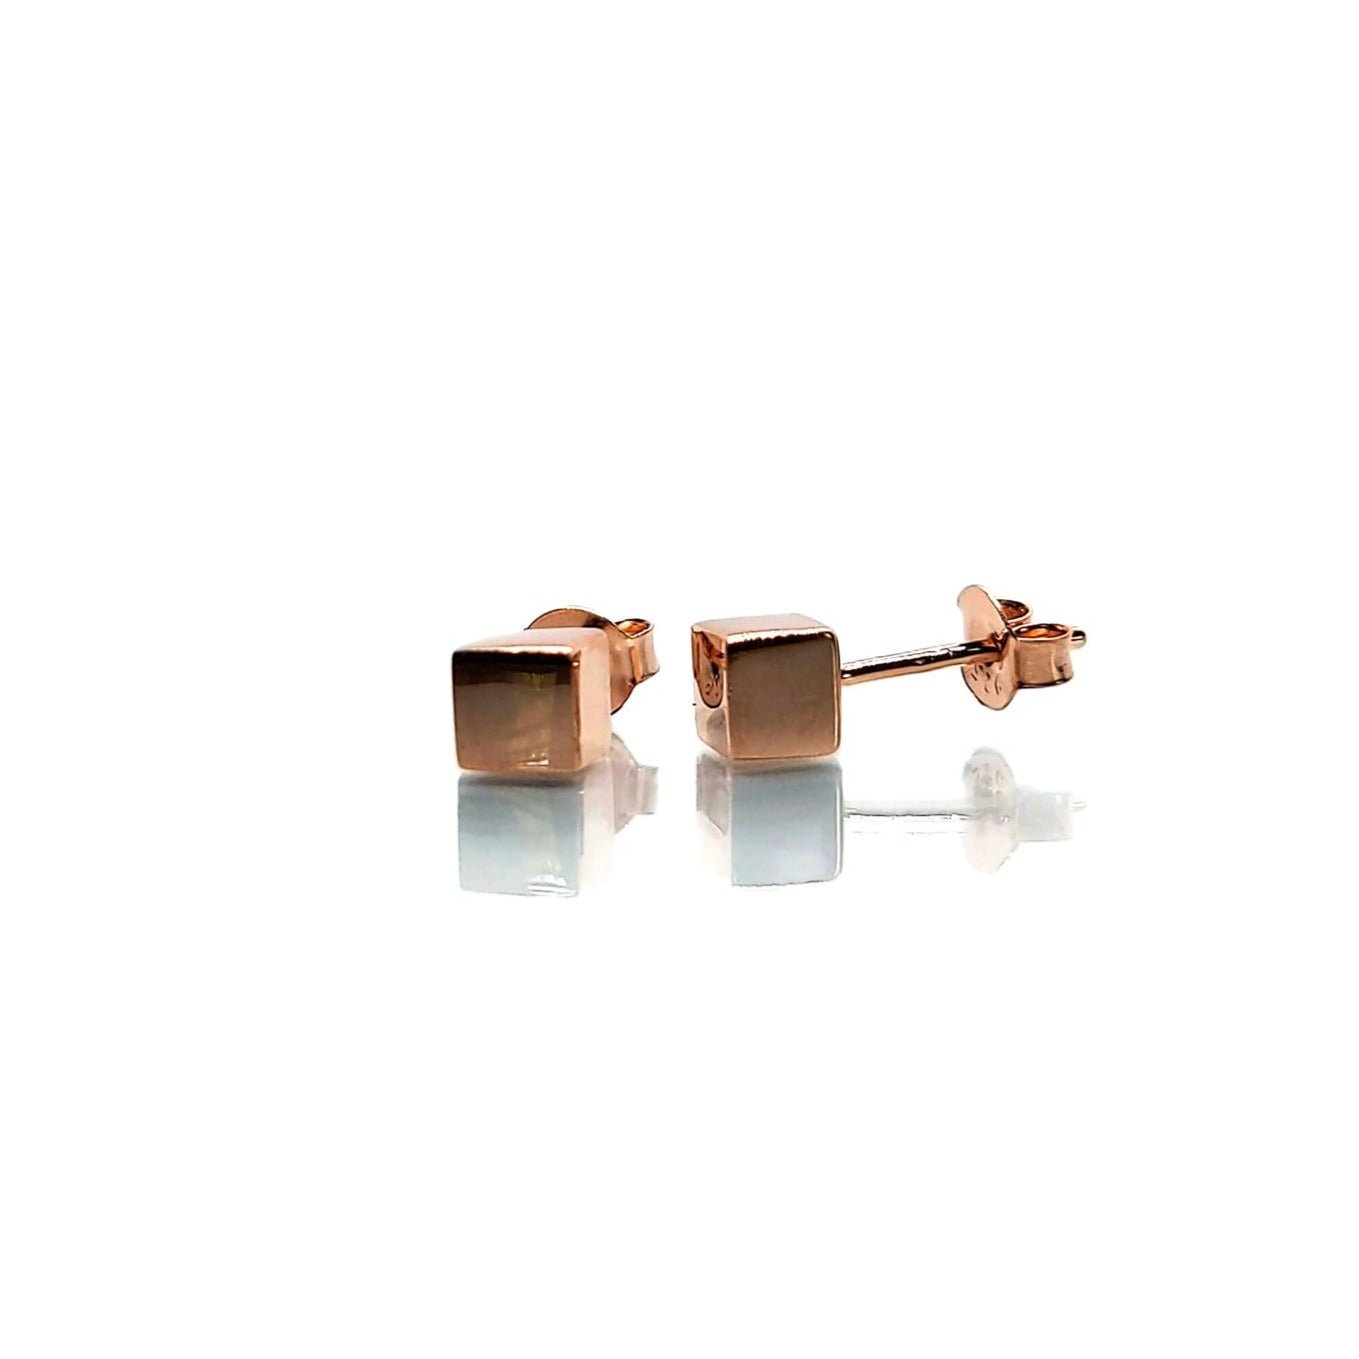 profile and front view of cube stud earrings, earring studs, post earrings